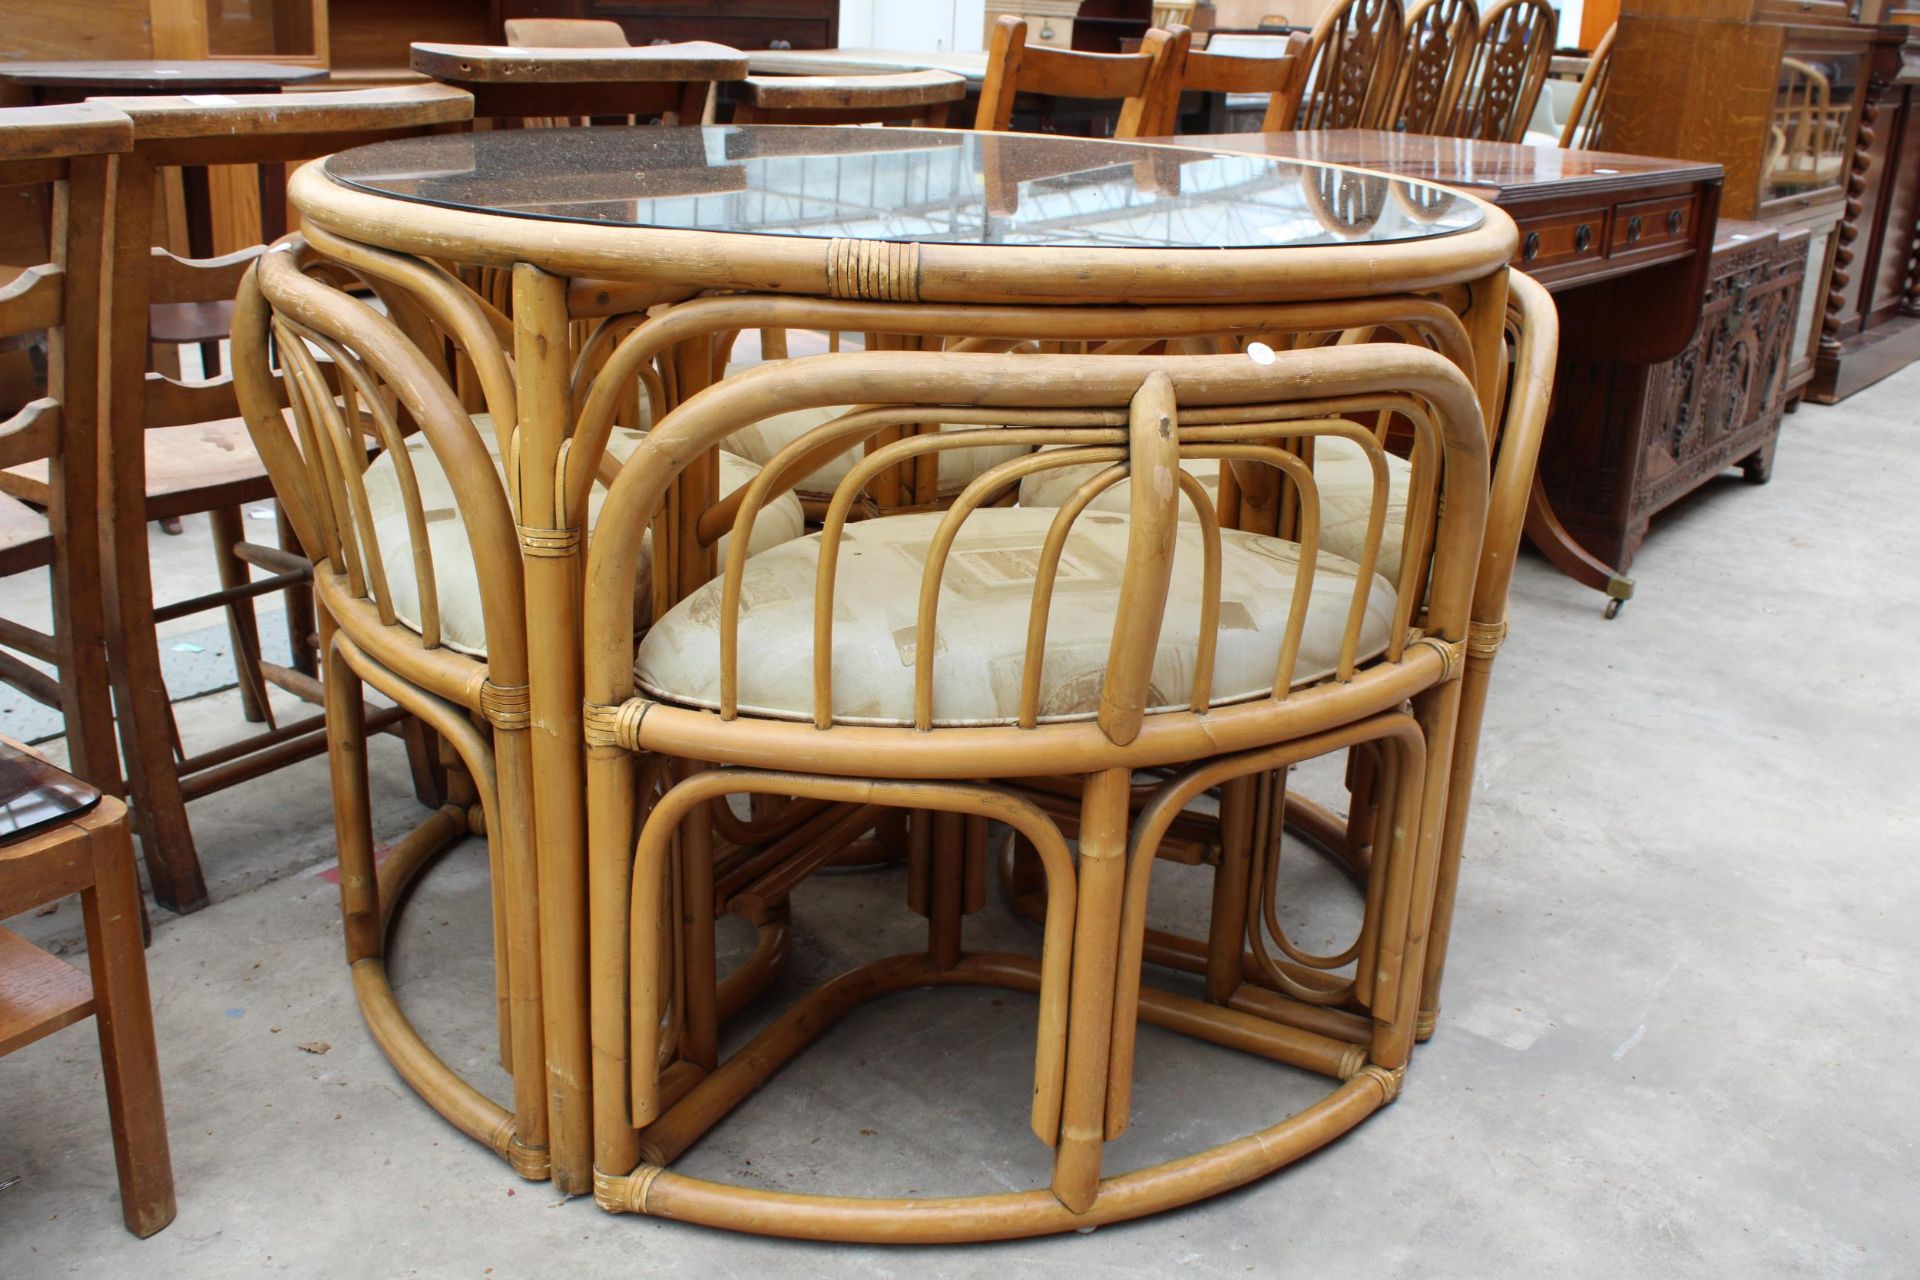 A MODERN 41" DIAMETER BAMBOO AND WICKER DINING TABLE WITH SMOKED GLASS TOP AND FOUR DINING CHAIRS - Image 2 of 6